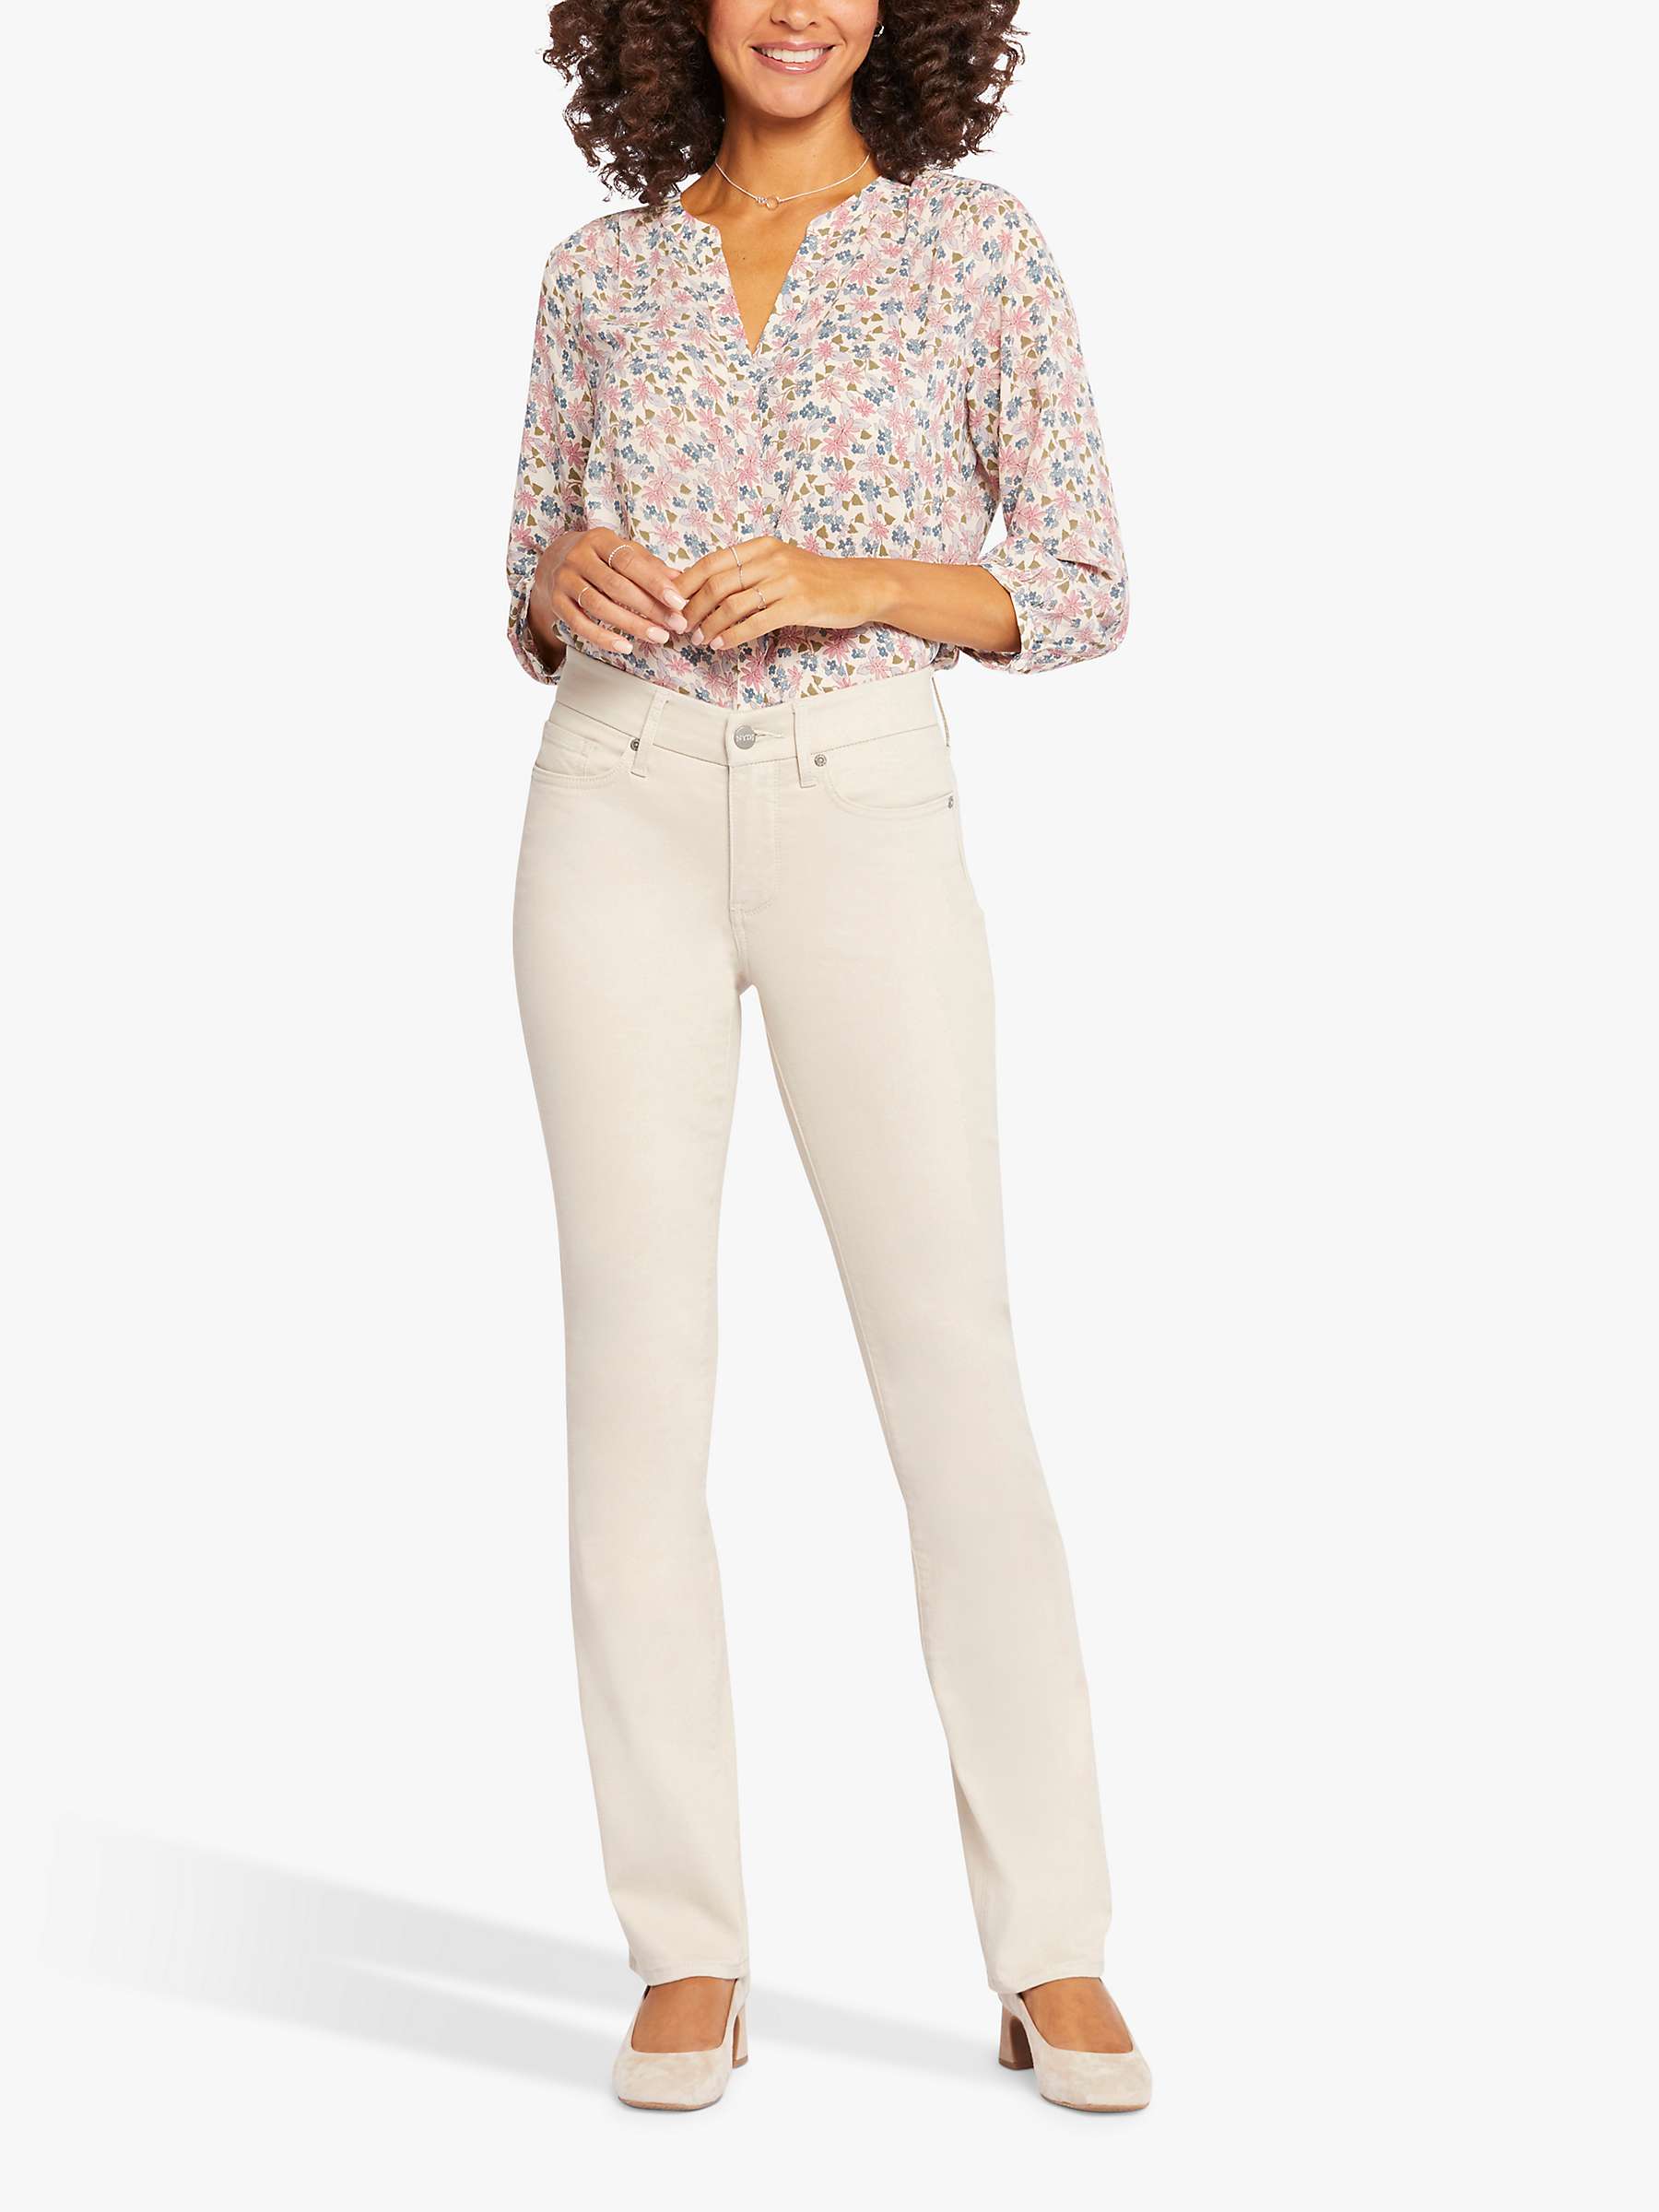 Buy NYDJ Waist-Match Marilyn Straight Jeans Online at johnlewis.com